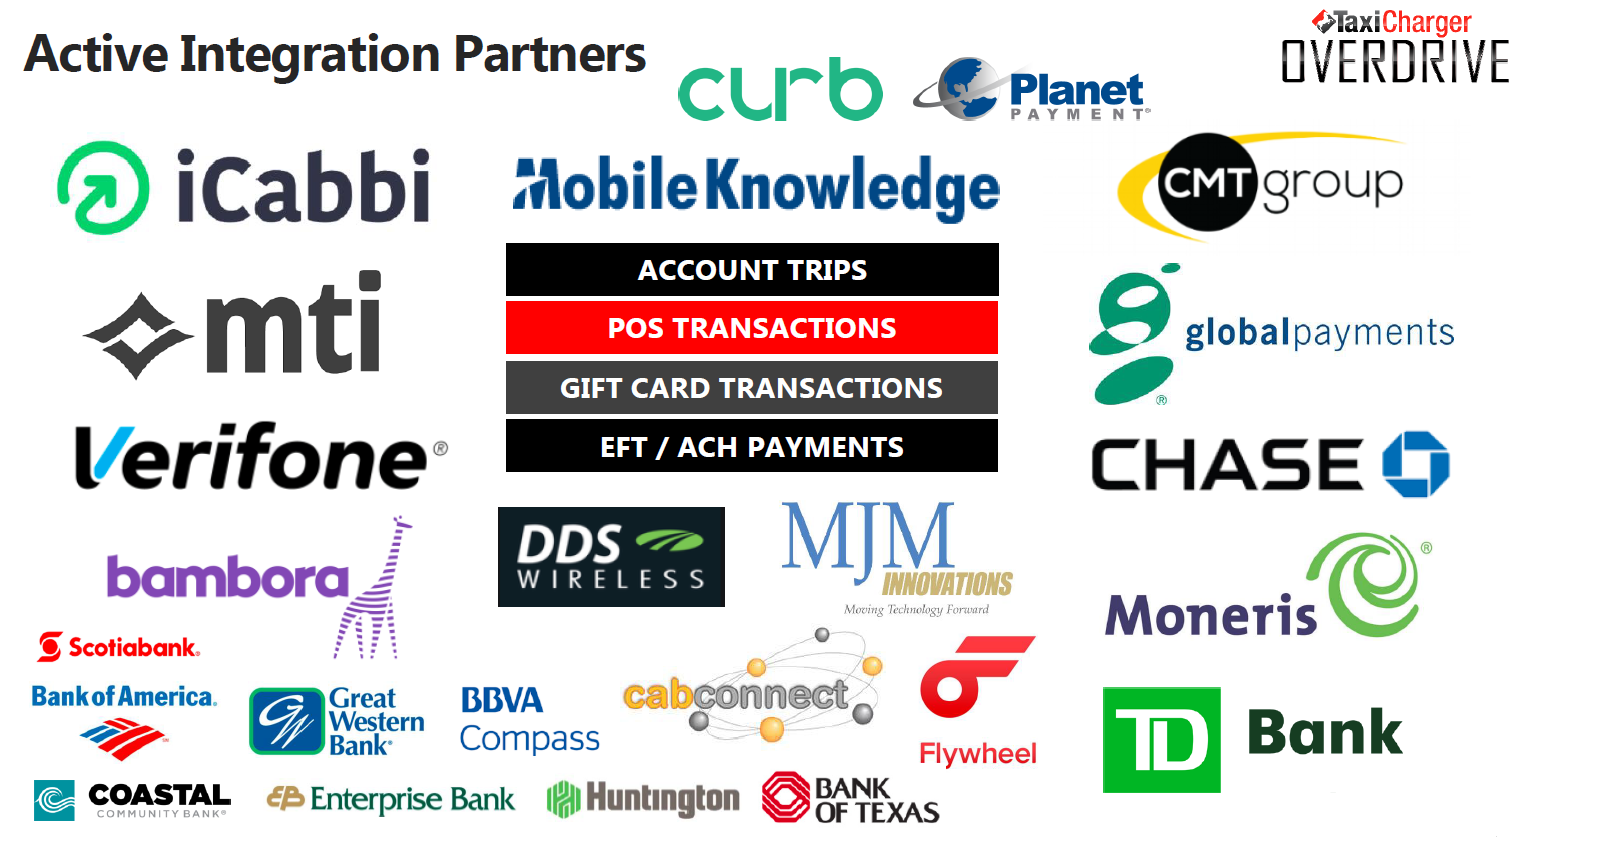 Active Integration Partners: iCabbi, Mobile Knowledge (XDS & Cabmate), Creative Mobile Technologies (CMT), MTI, MT Data, Bambora, Taxi Magic (Ride Charge), Verifone, CURB, Global Payments, Moneris, Chase Paymentech, Planet Payment, Cab Connect, FlyWheel, MJM Innovations, Givex, Moneybar, Scotiabank, TD Bank, Great Western Bank, BBVA Compass, Bank of America, Coastal Community Bank, Enterprise Bank, Bank of Texas, Huntington,Account Trips, POS Transactions, Gift Card Transactions, EFT/ACH Payments and more.